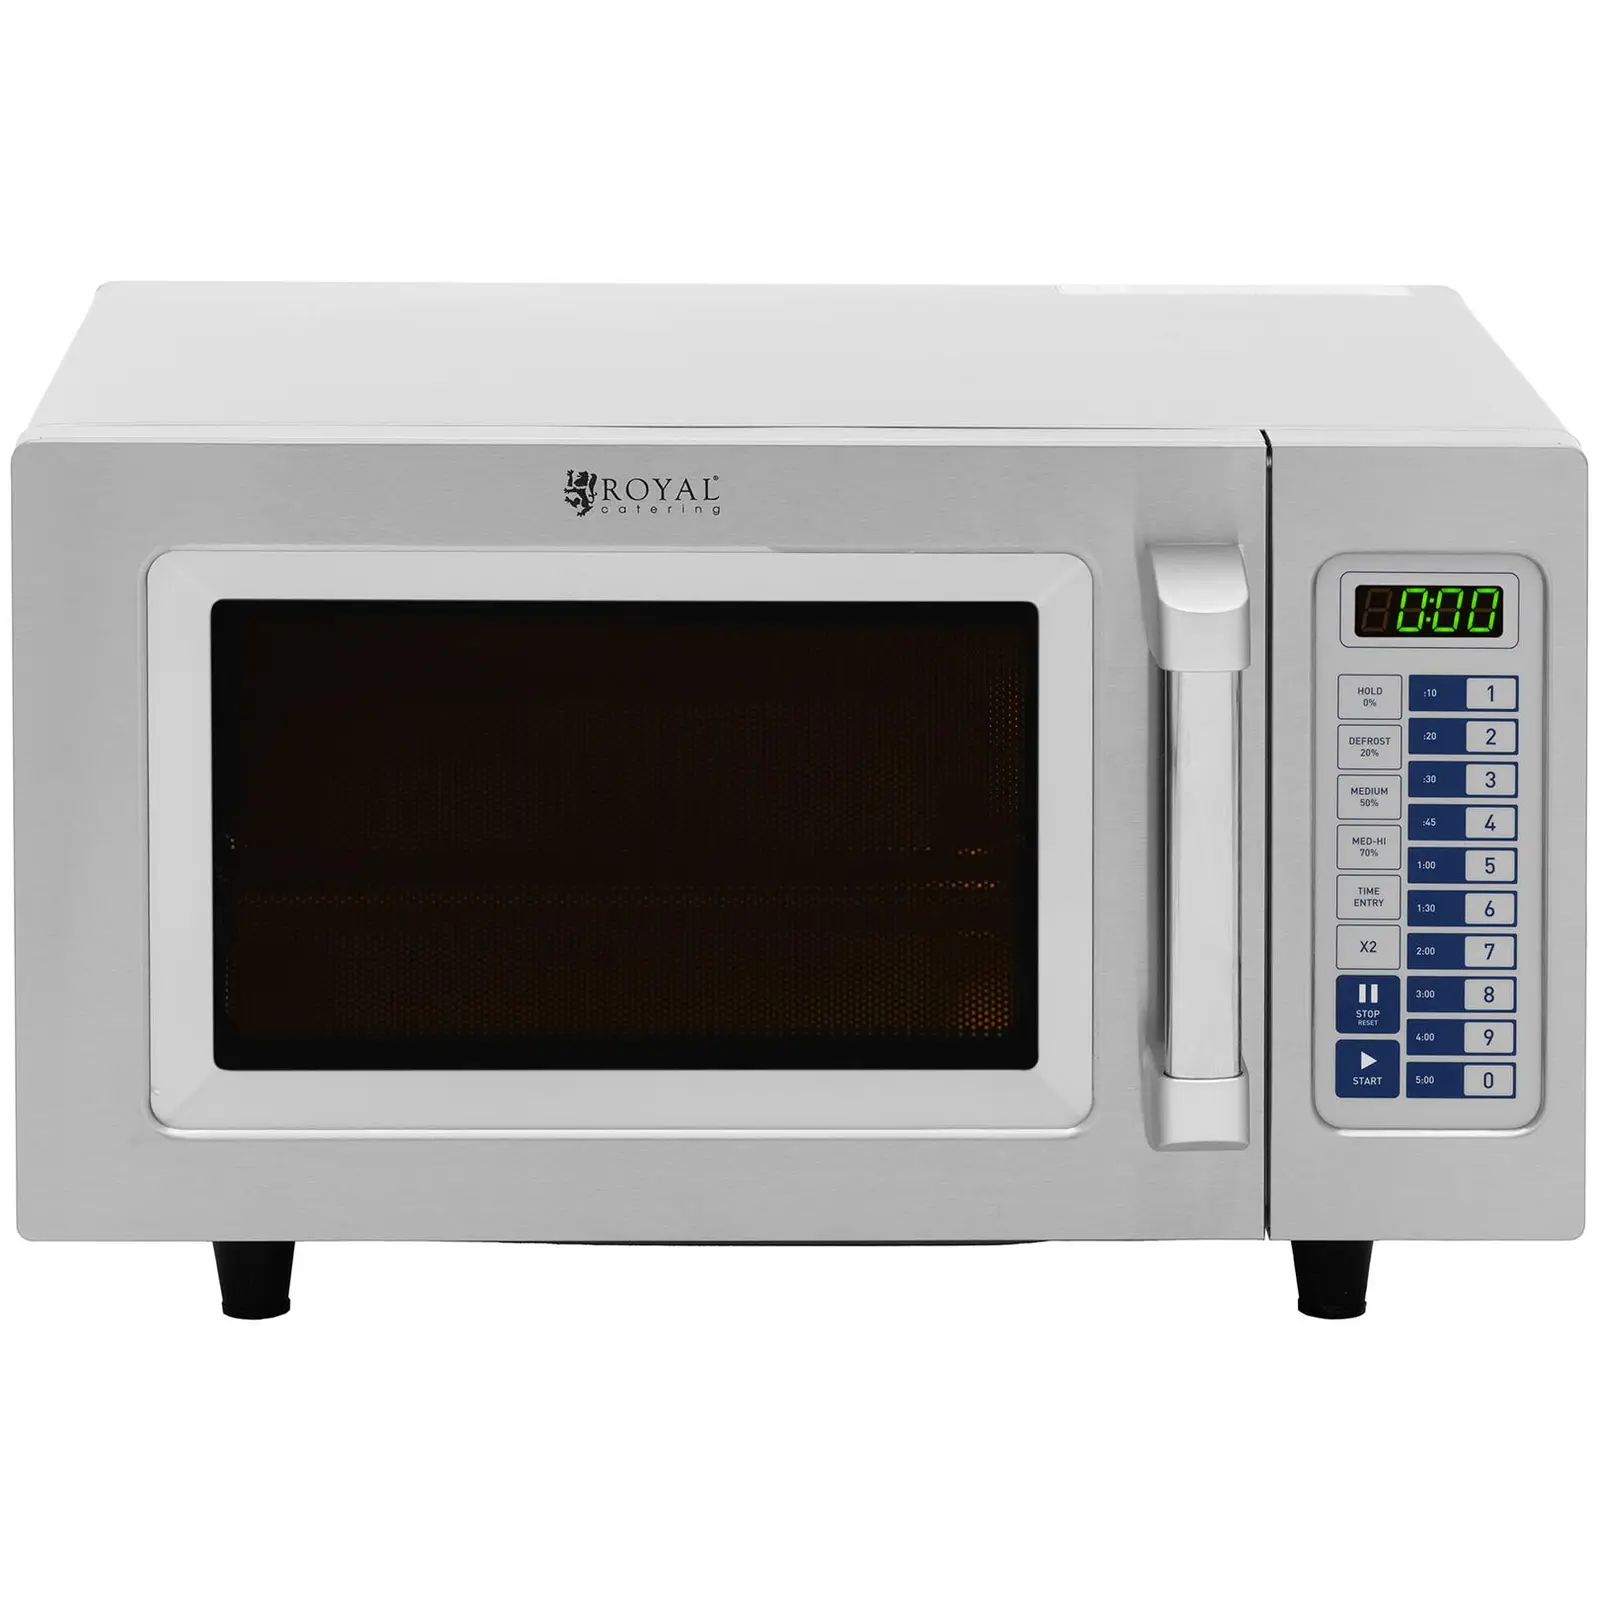 Four micro onde - 1550 W - 25 L - Royal Catering